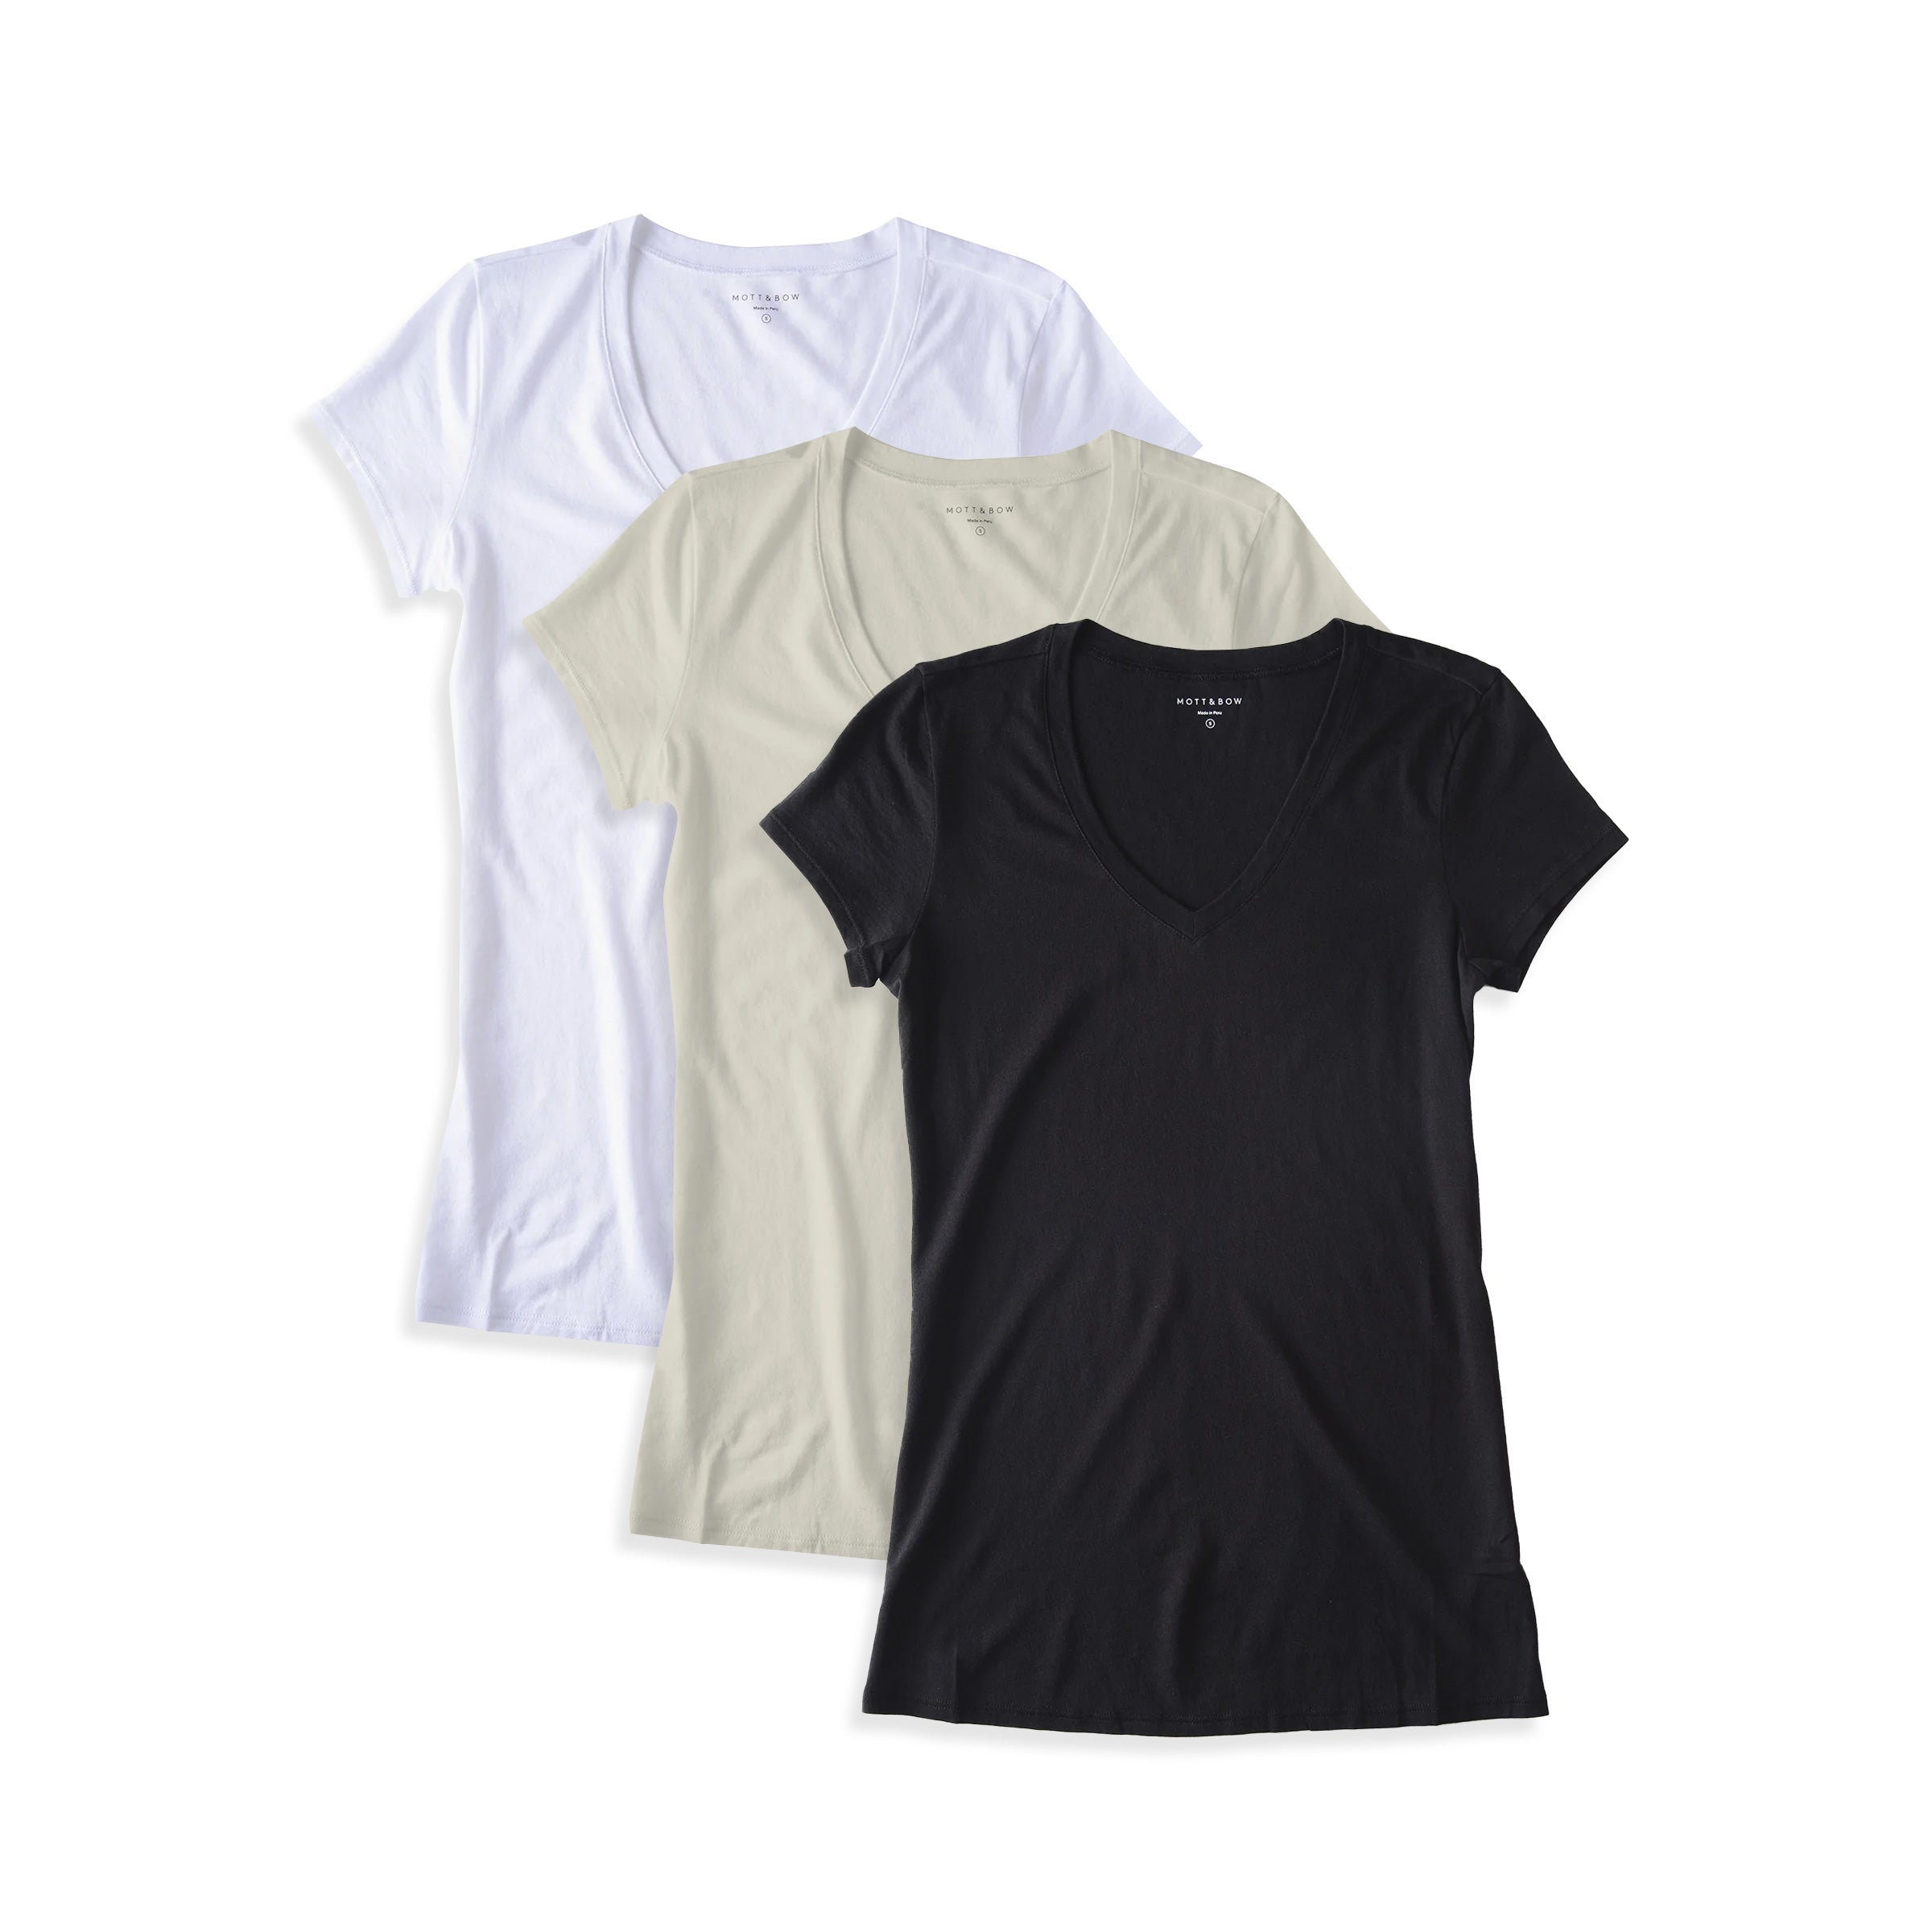 Women wearing White/Vintage White/Black Fitted V-Neck Marcy 3-Pack tees